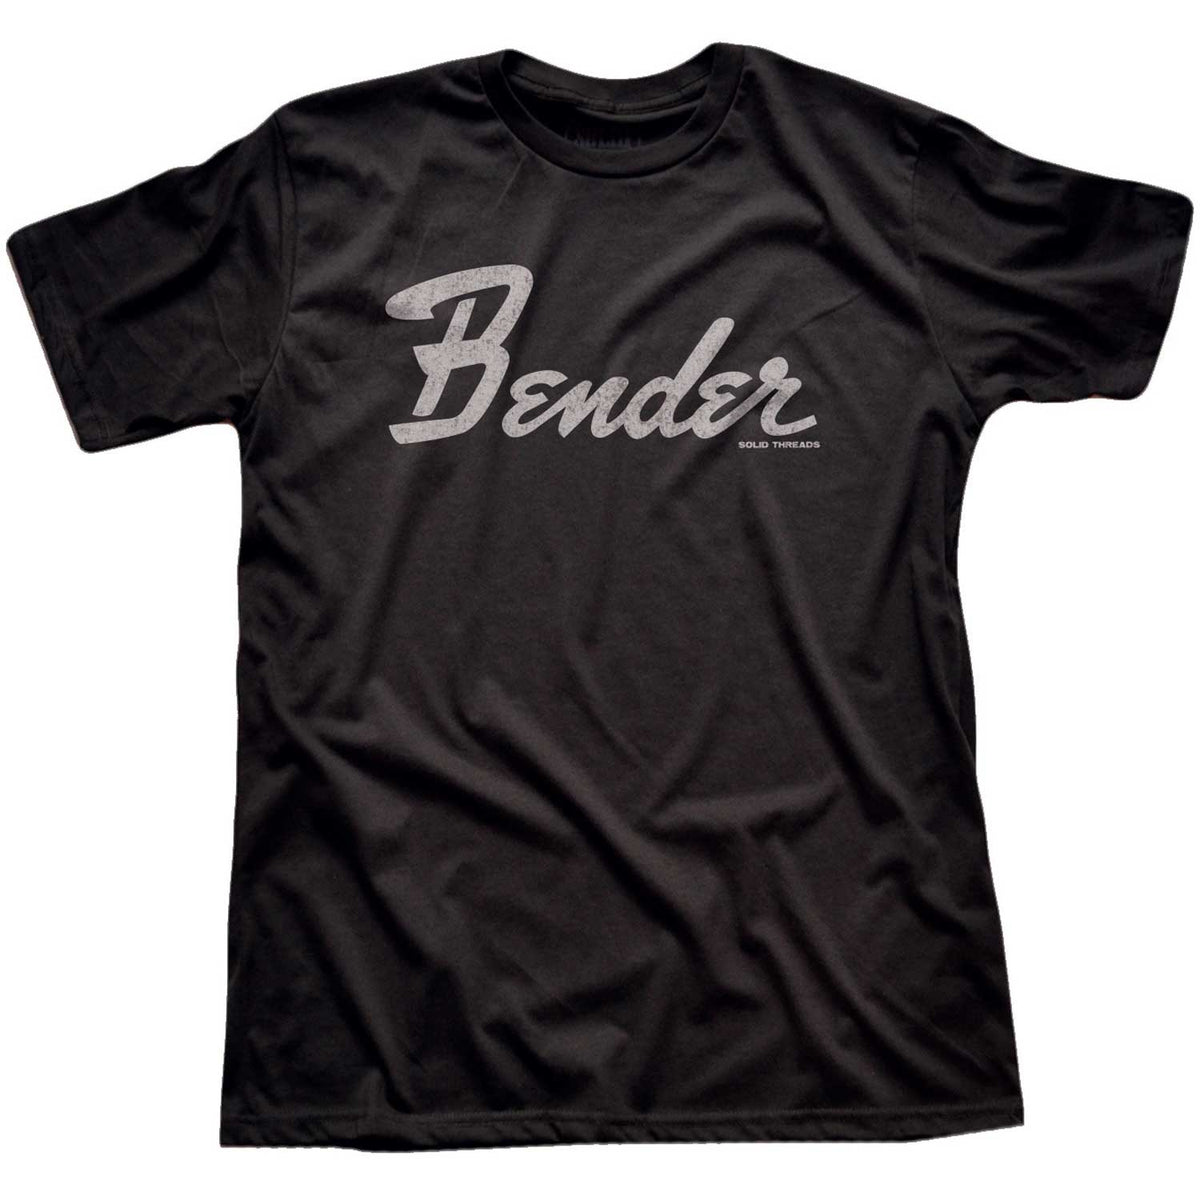 Men&#39;s Bender Vintage Party Graphic T-Shirt | Funny Music Festival Tee | Solid Threads